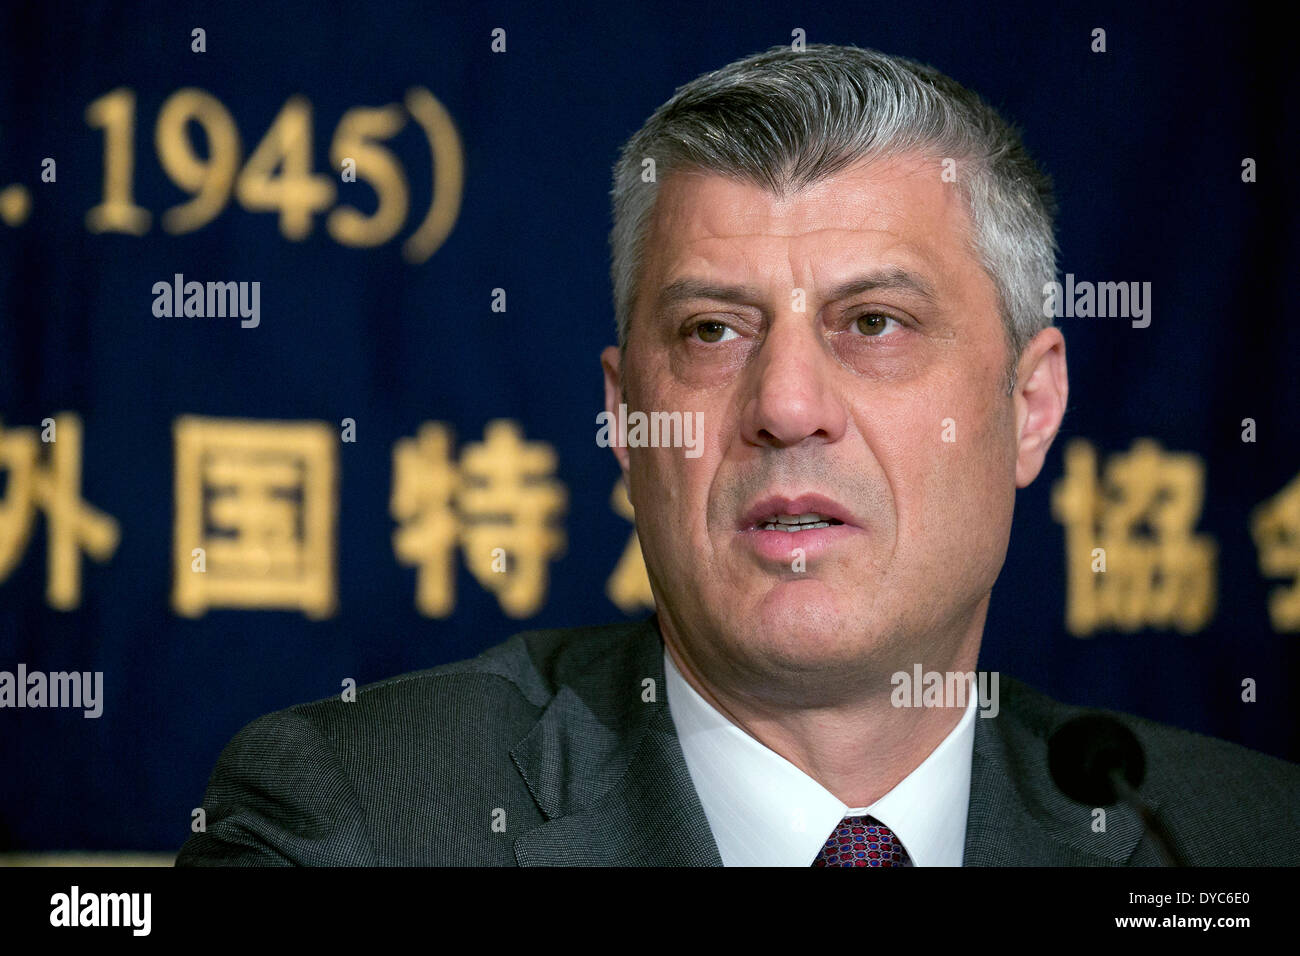 Tokyo, Japan - The Prime Minister of the Republic of Kosovo Hashim Thaci attends a press conference at the Foreign Correspondent's Club of Japan (FCCJ) on April 14, 2014. In official visit to Japan Hashim Thaci holding talks with Prime Minister Shinzo Abe this morning to talk about the bilateral agenda of both countries. Japan was one of the first countries to recognize his nation soon after the declaration of independence. Credit:  Rodrigo Reyes Marin/AFLO/Alamy Live News Stock Photo